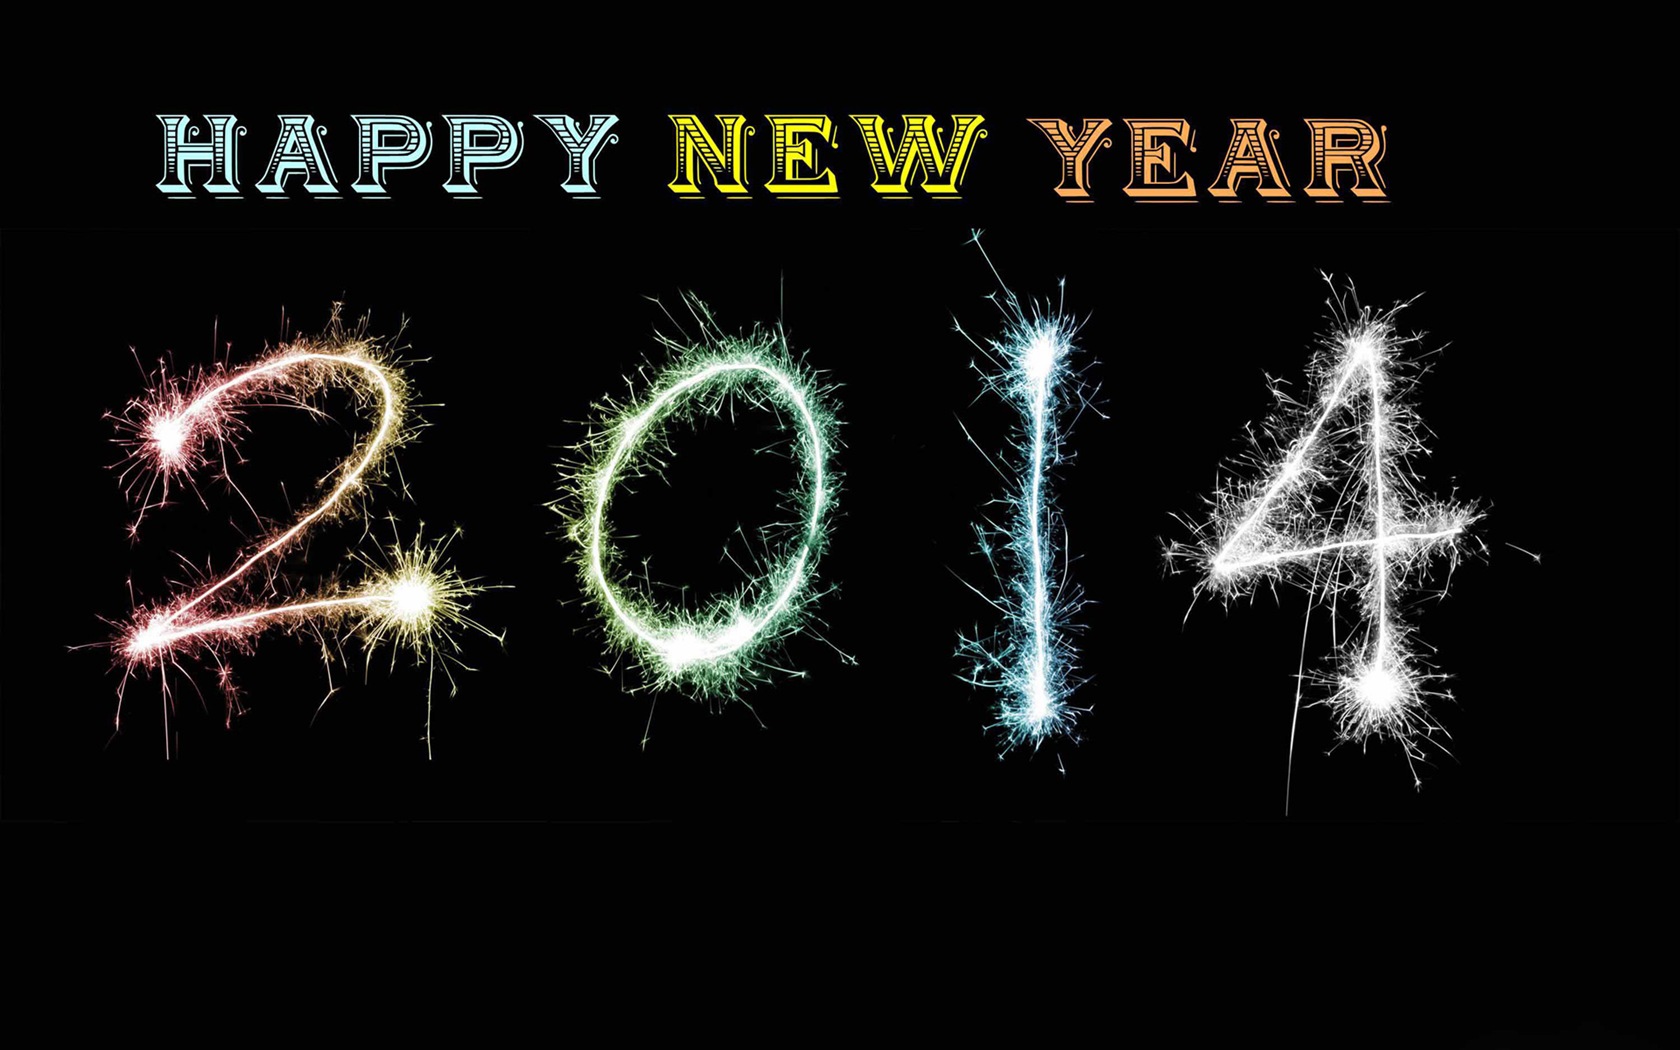 2014 New Year Theme HD Wallpapers (2) #12 - 1680x1050